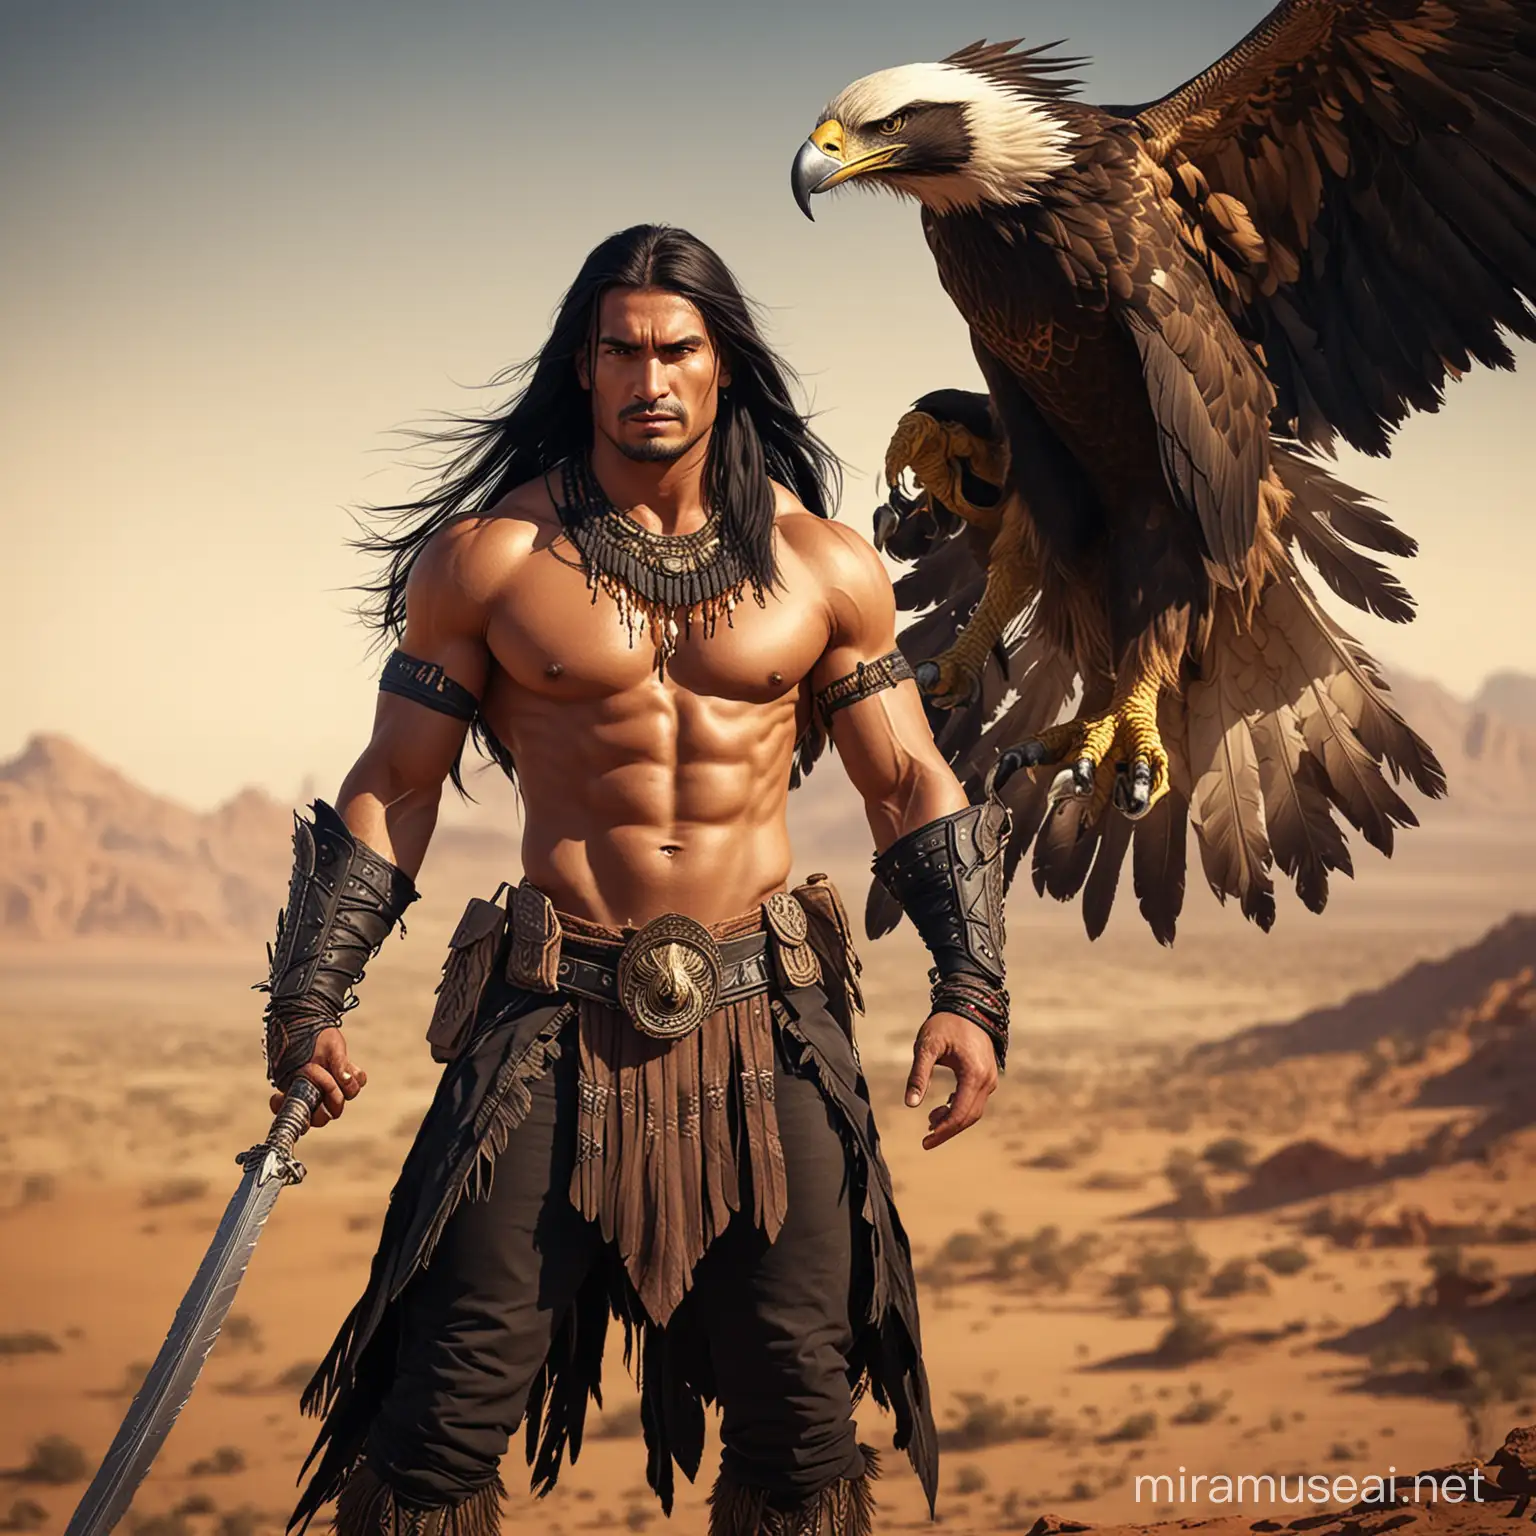 Apache Warrior Soaring with Eagle in Desert Sky